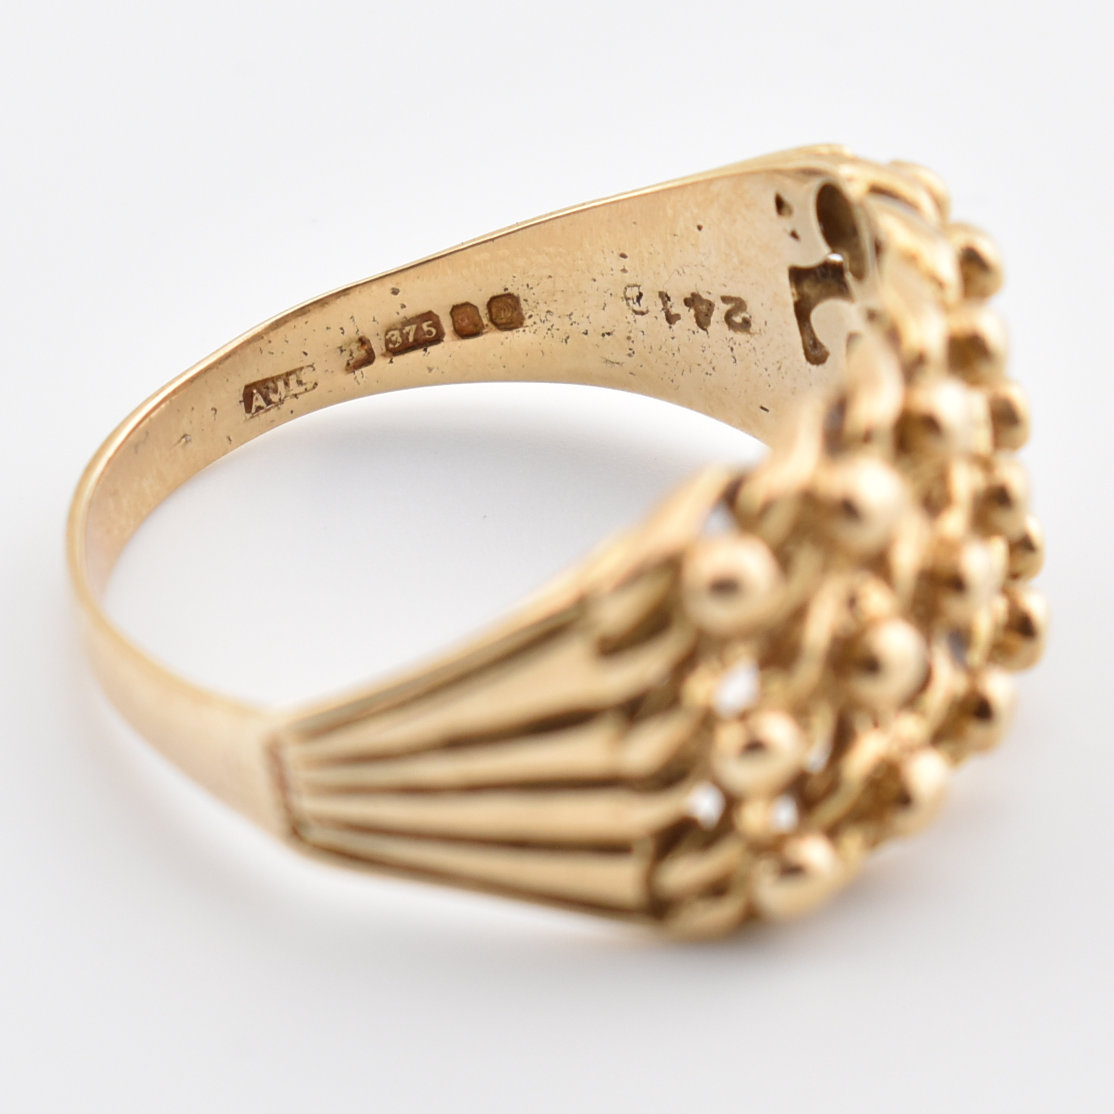 HALLMARKED 9CT GOLD KEEPERS RING - Image 2 of 8